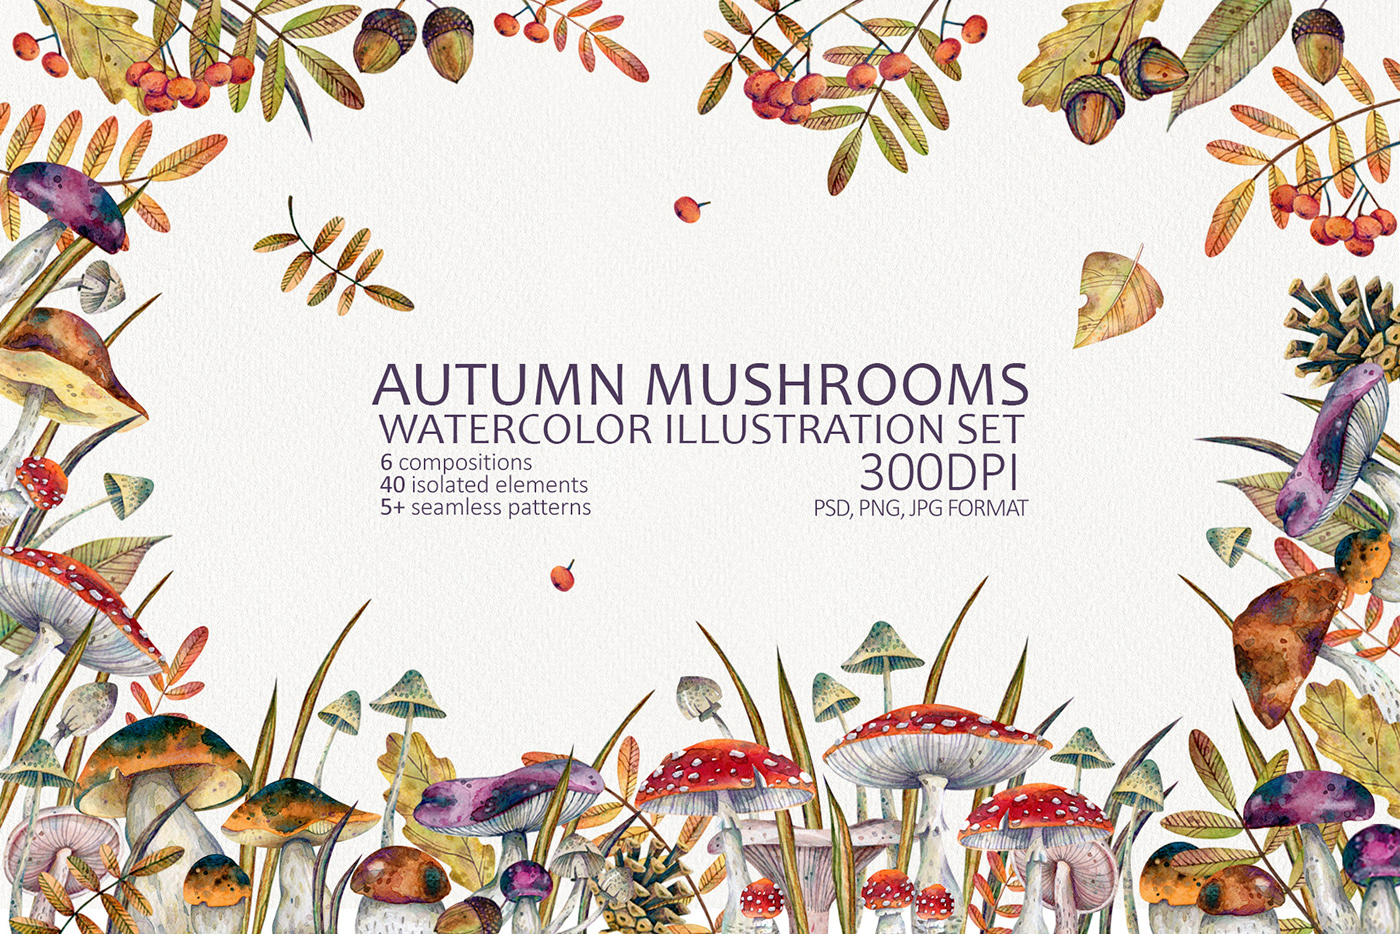 autumn illustration Create Drawing  hand drawn hand drawn illustration pattern (fashion design) textile design  watercolor illustration Watercolor mushrooms watercolor painting